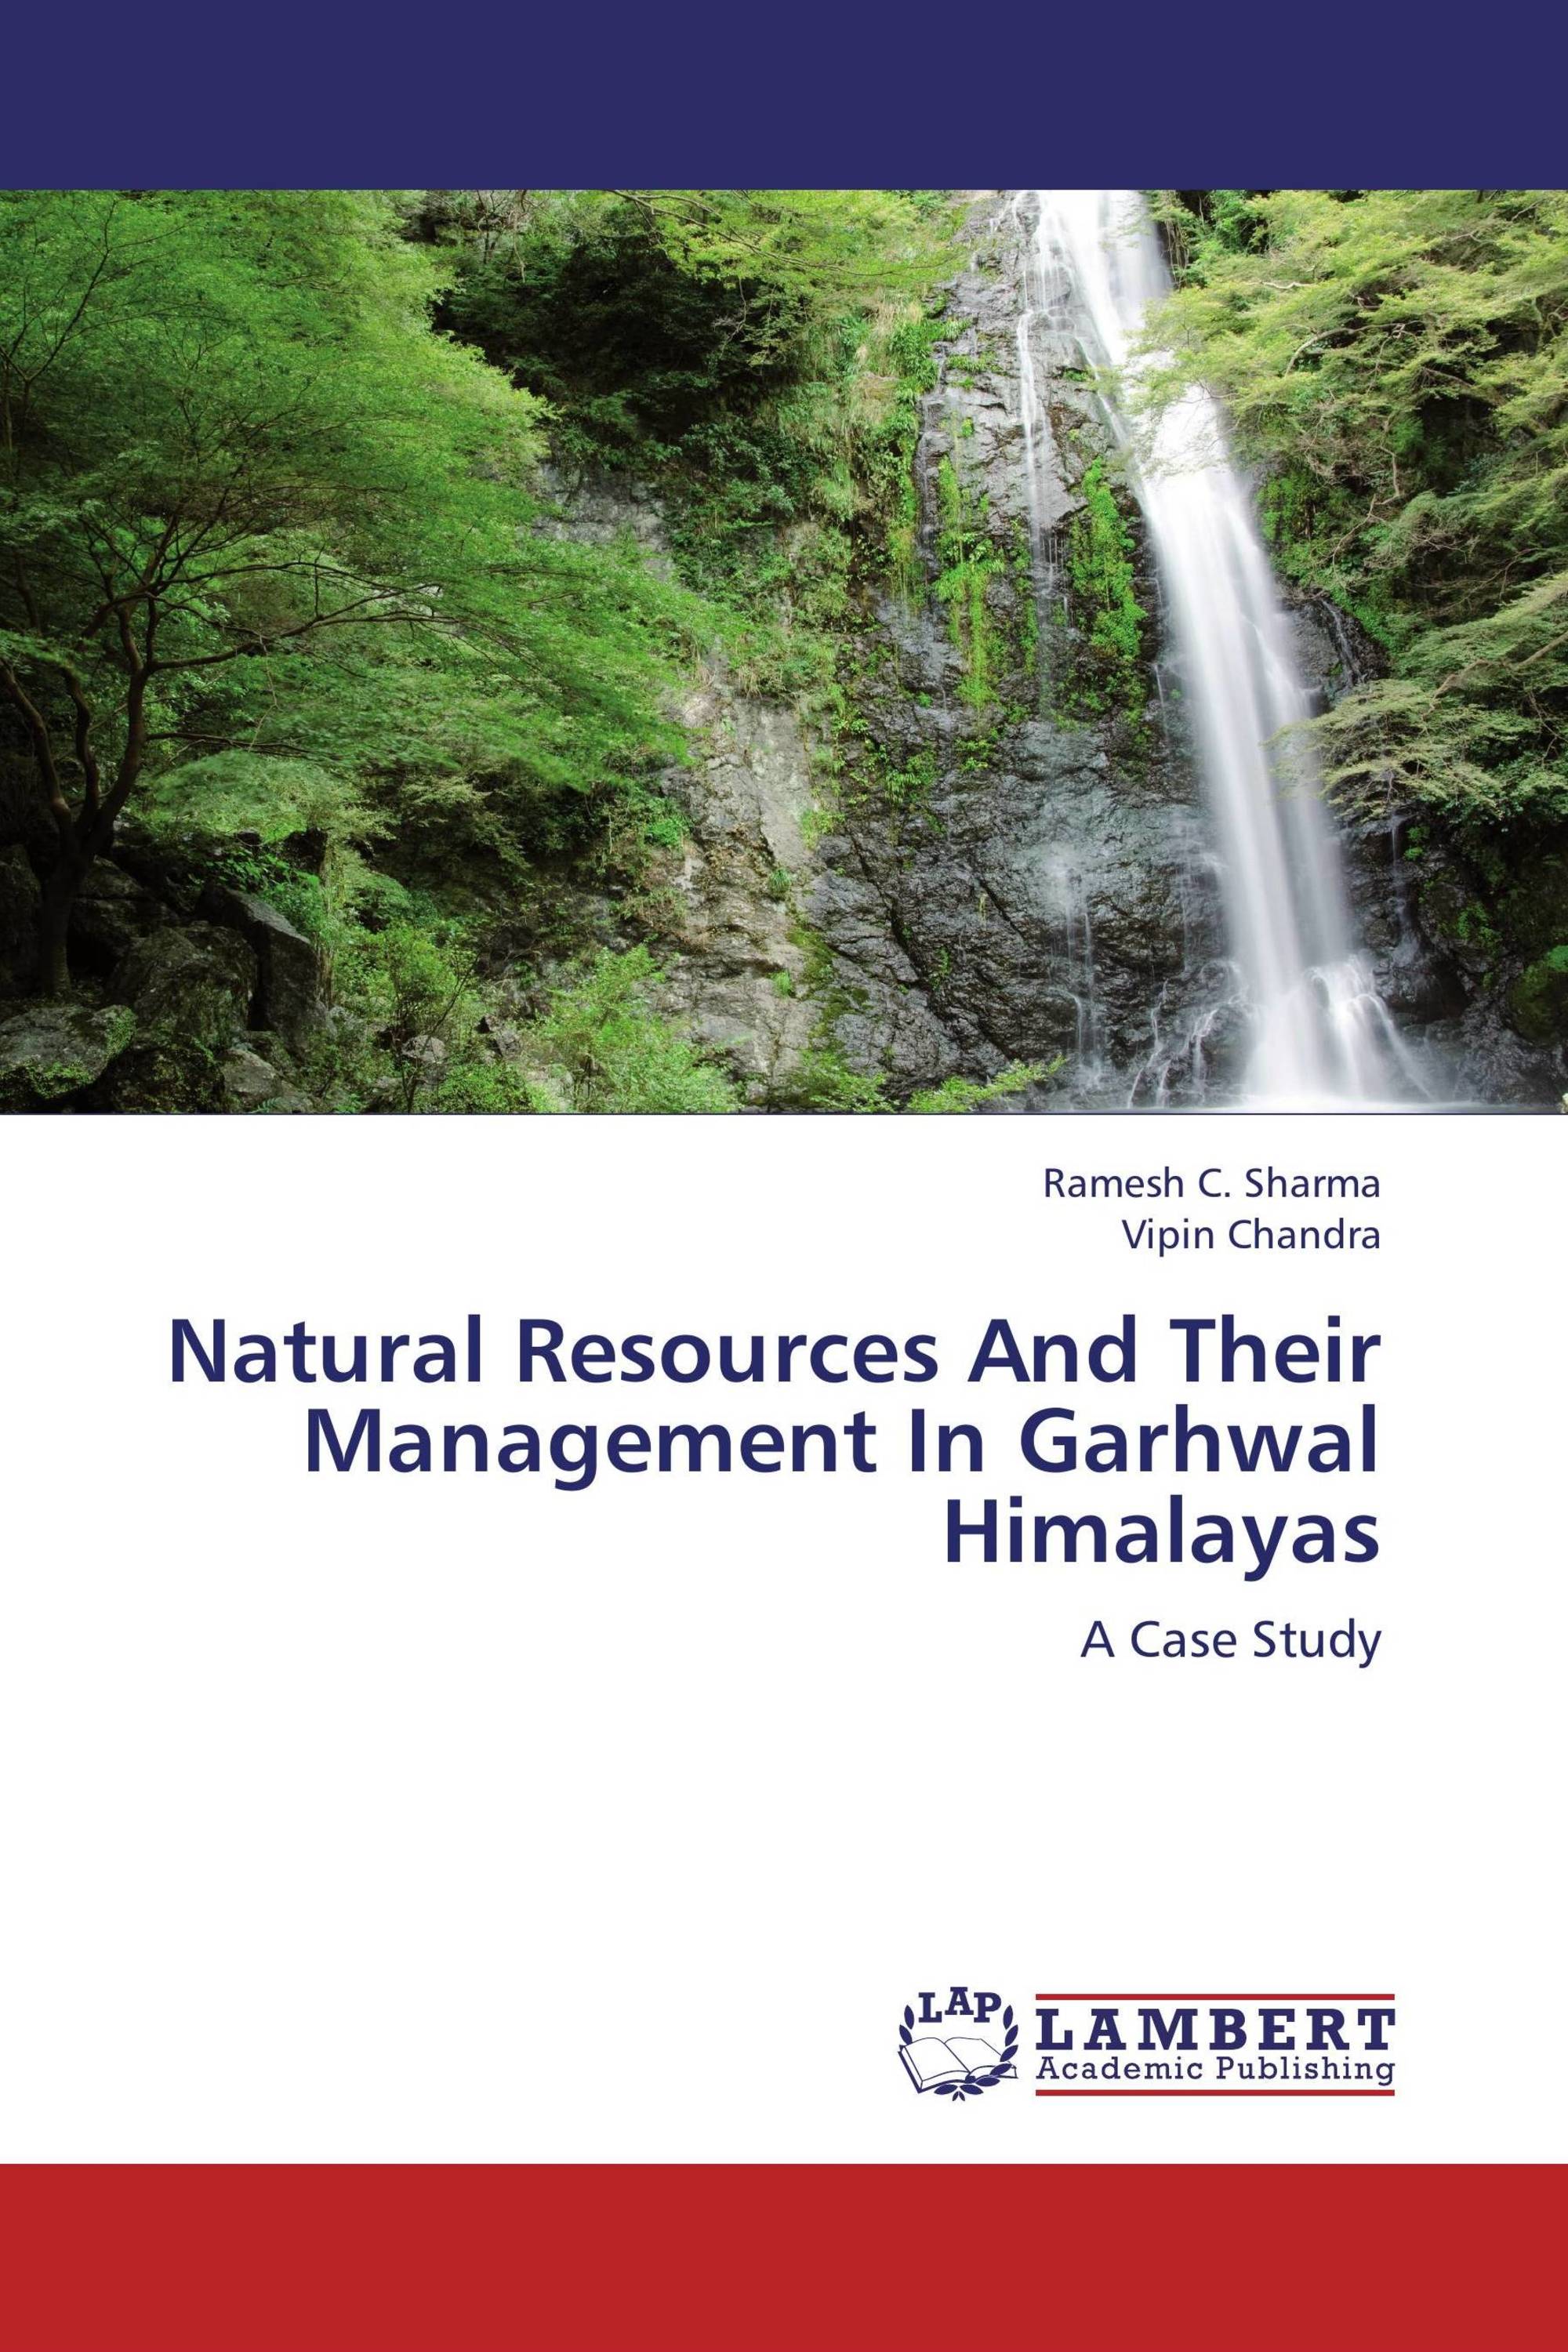 Water resource management thesis